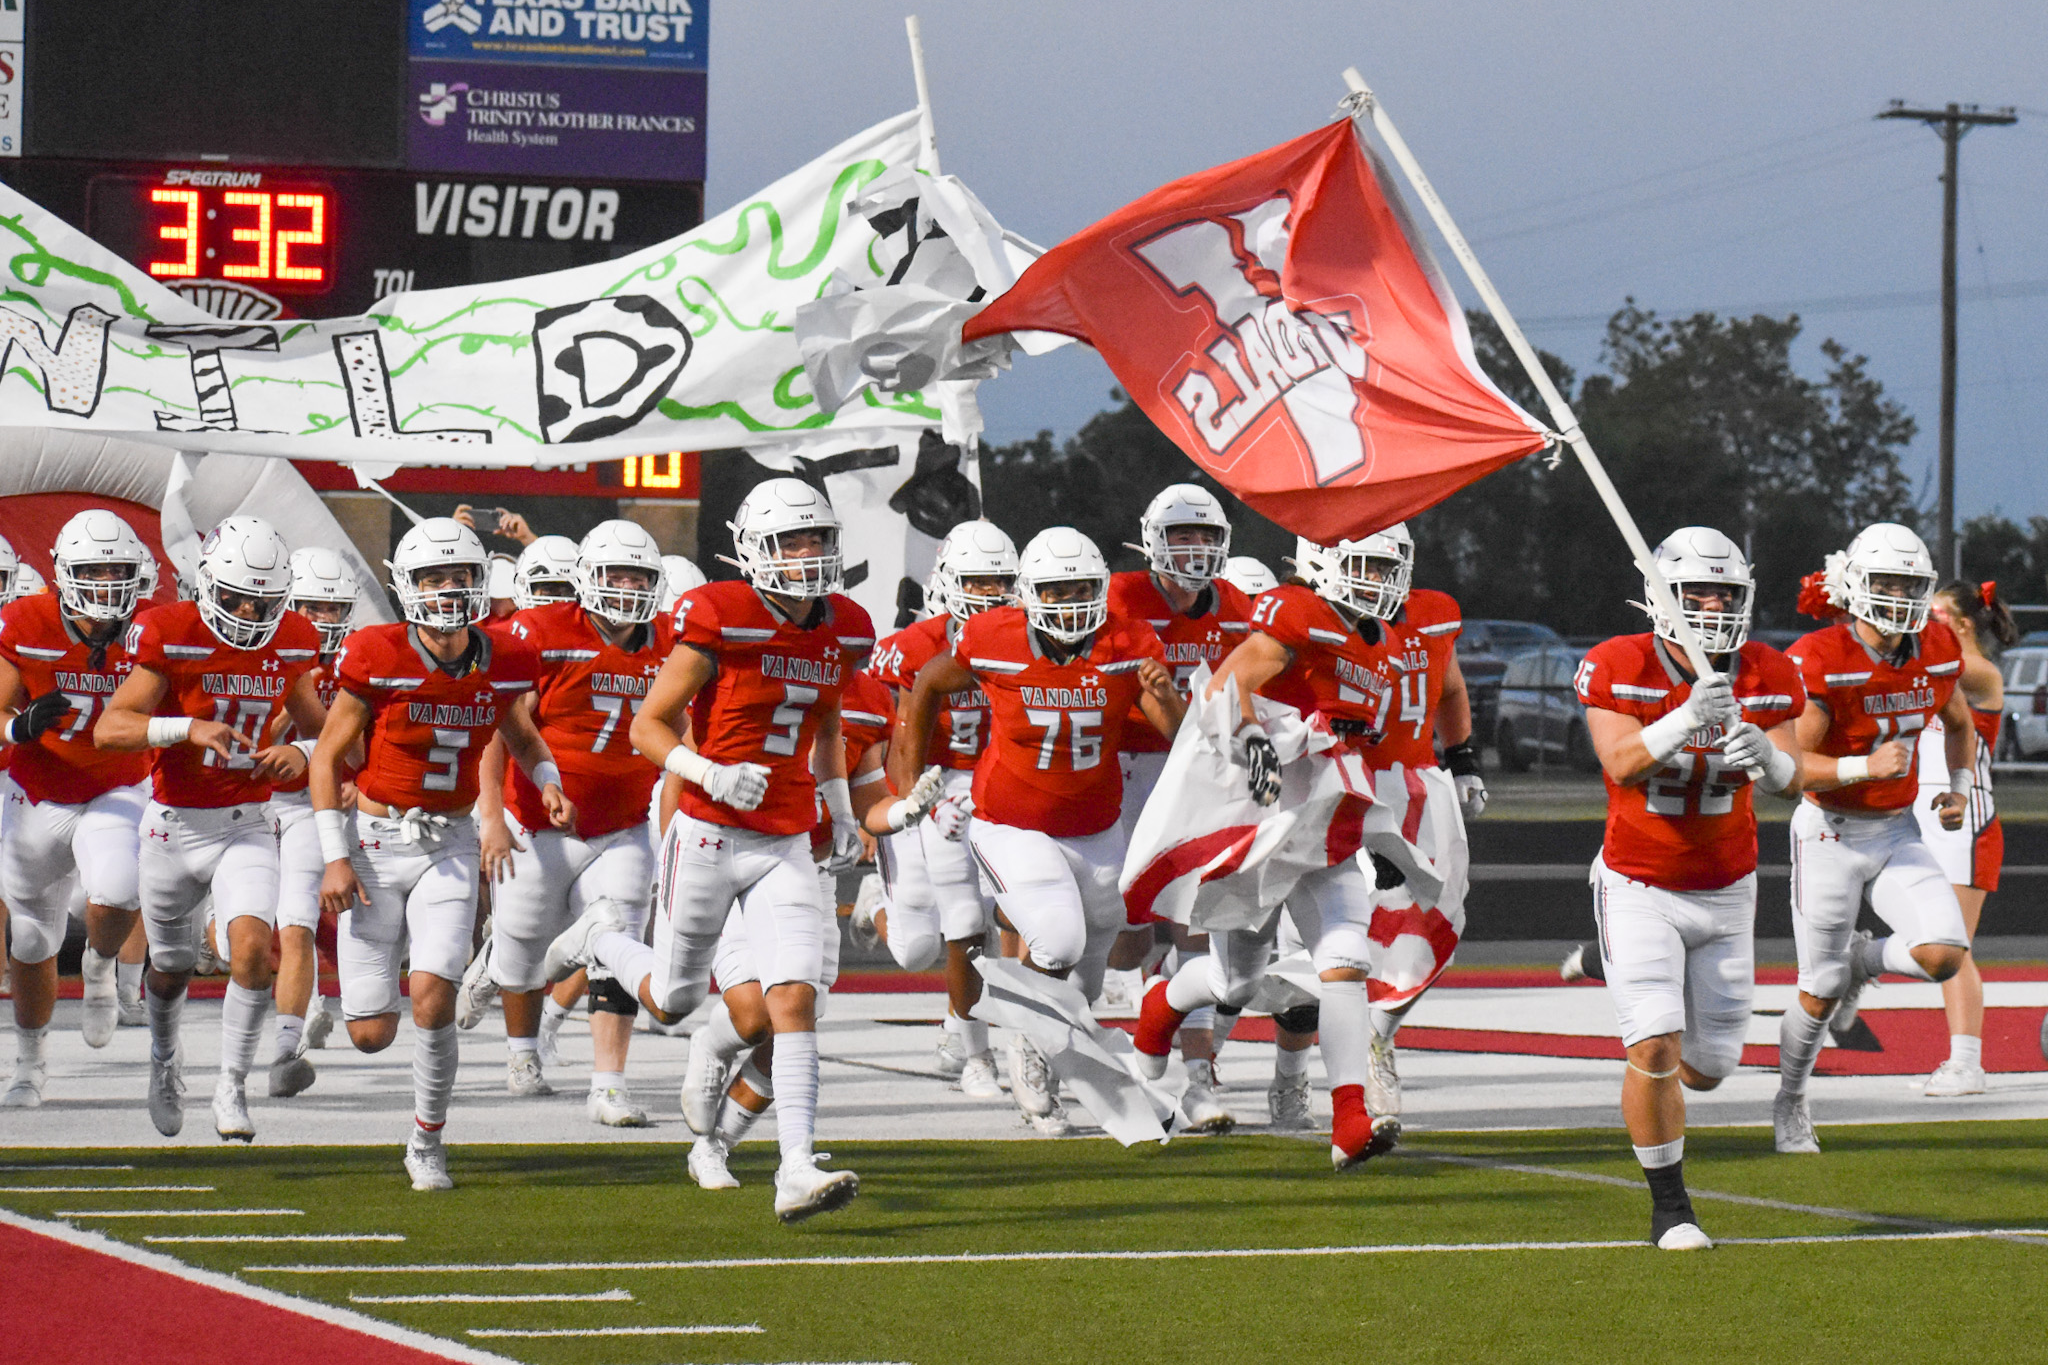 the van vandal football team run out onto the field carrying the vandal flag